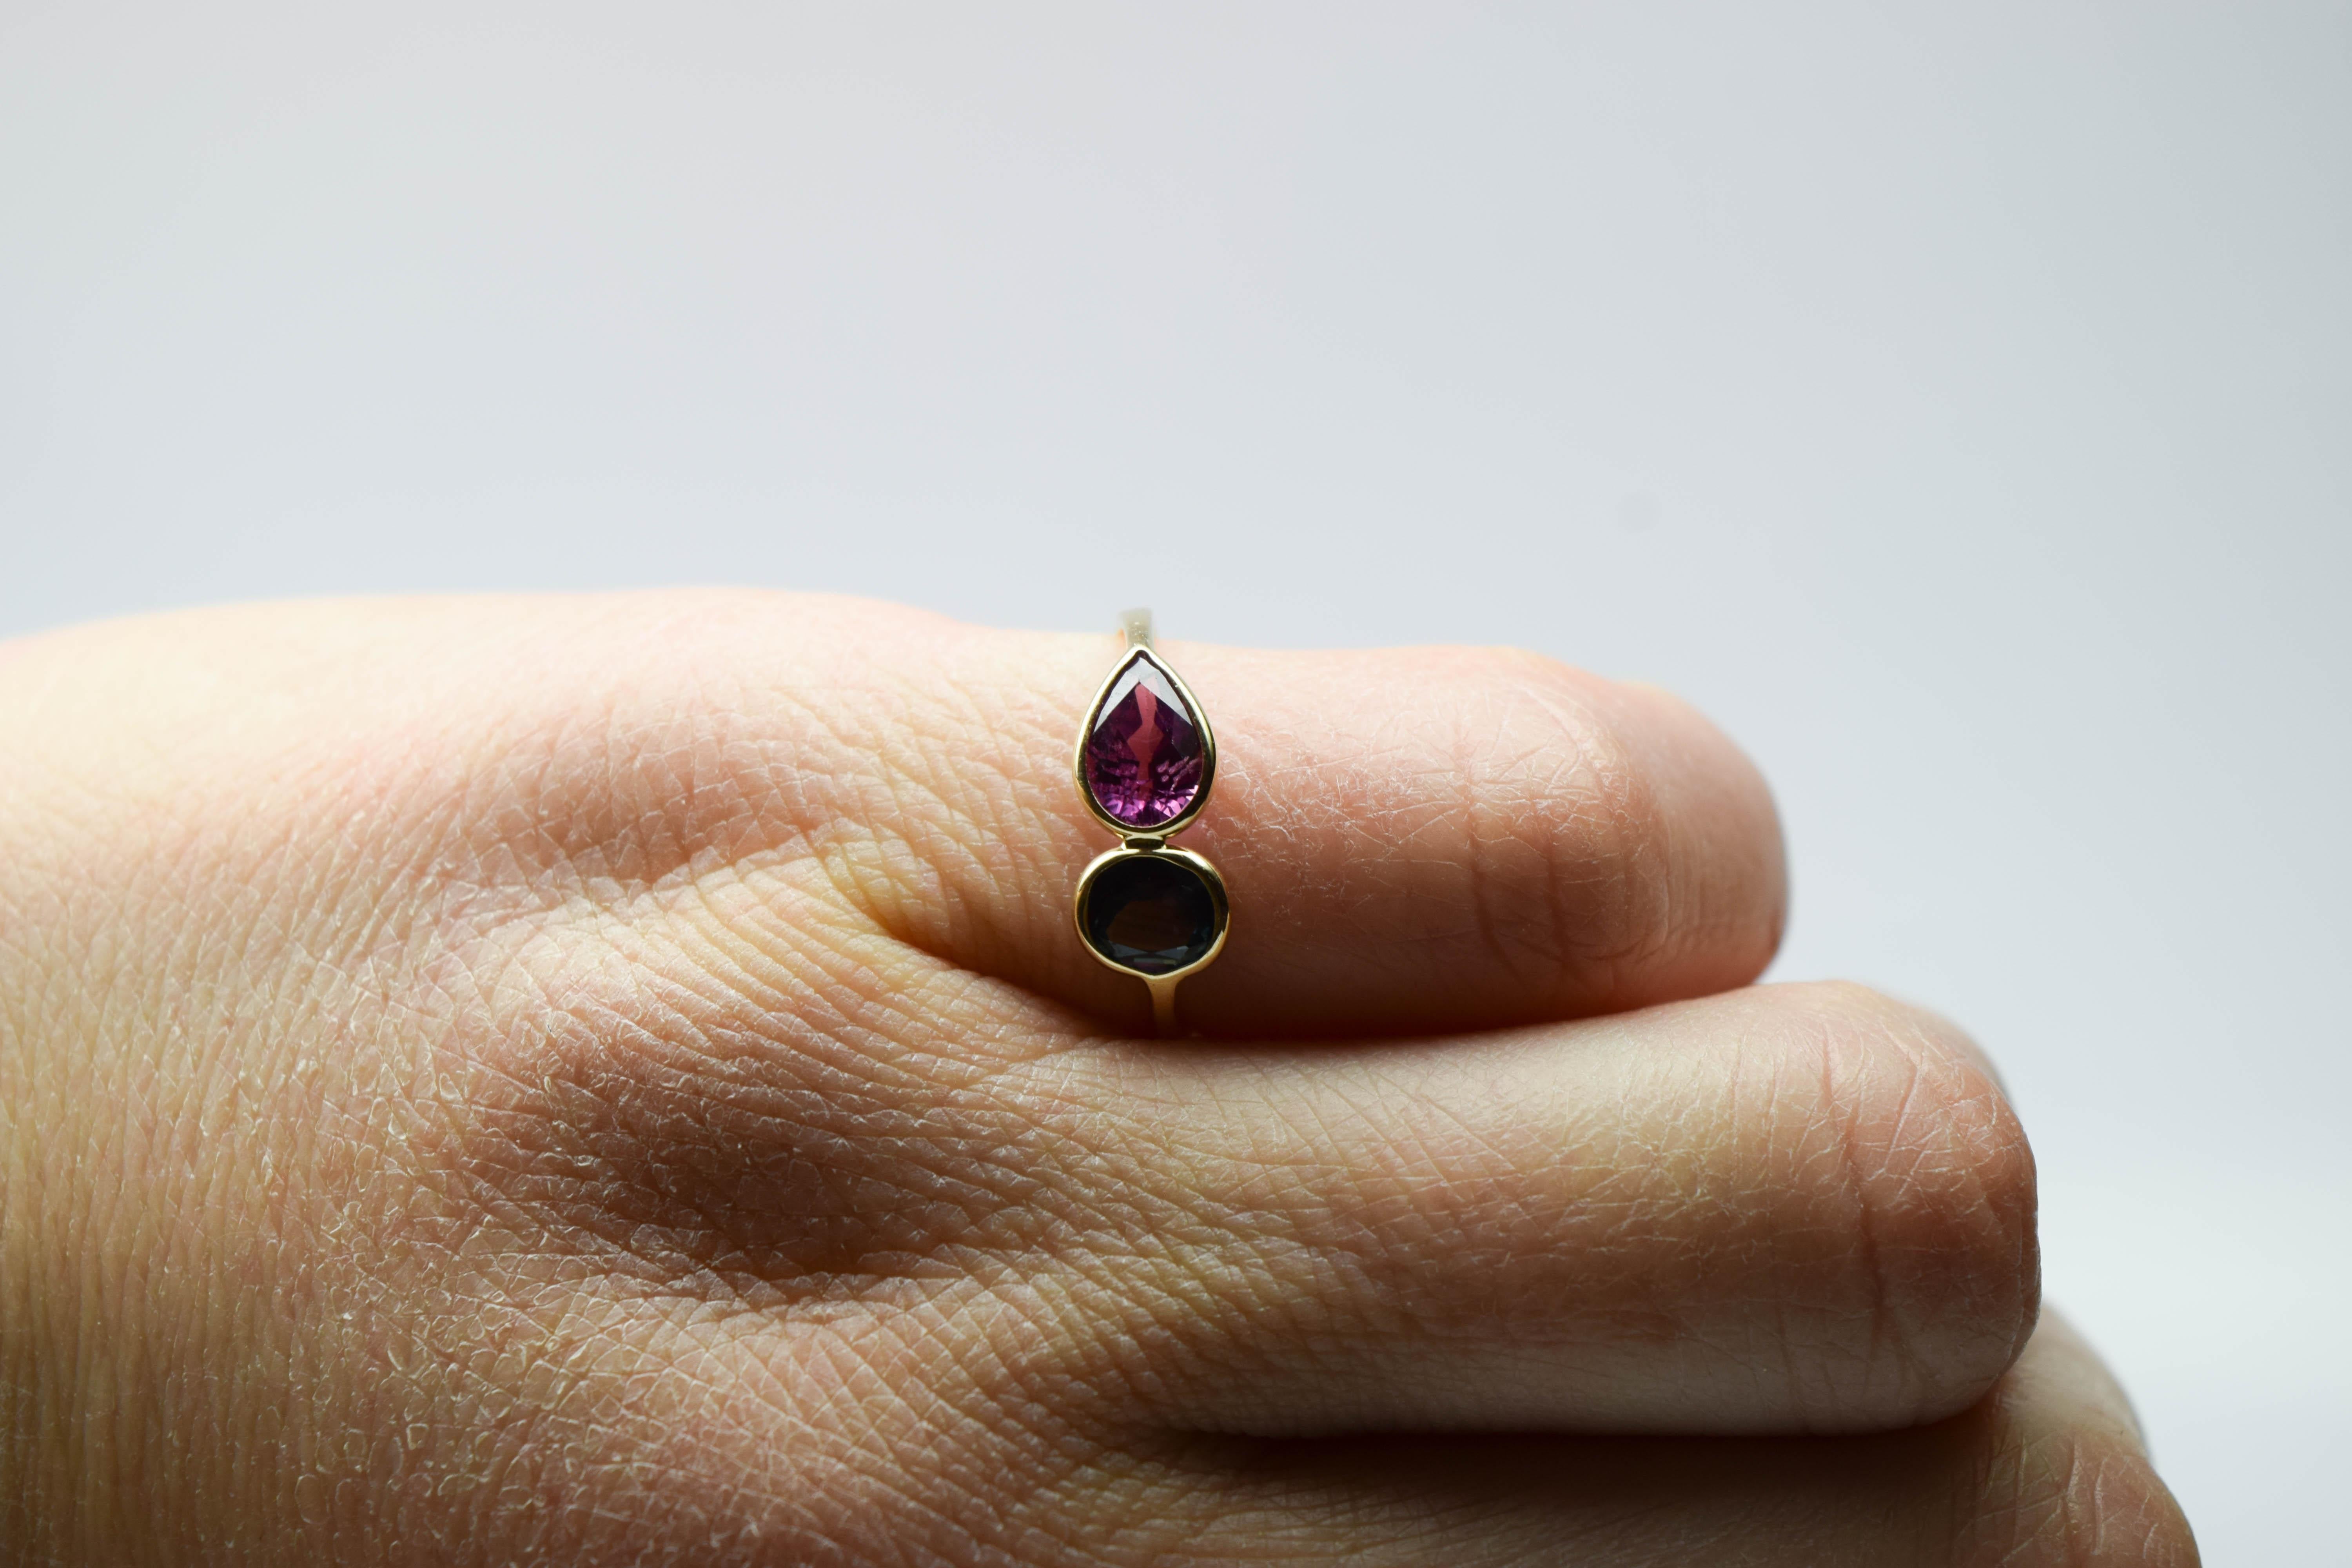 Certified Pink Sapphire and Teal Sapphire ring in 14KT yellow gold, very different type of ring with completely open space under ring, the ring is made by hand and finished by hand as well. The stones are rare and very beautiful in colors!
Metal